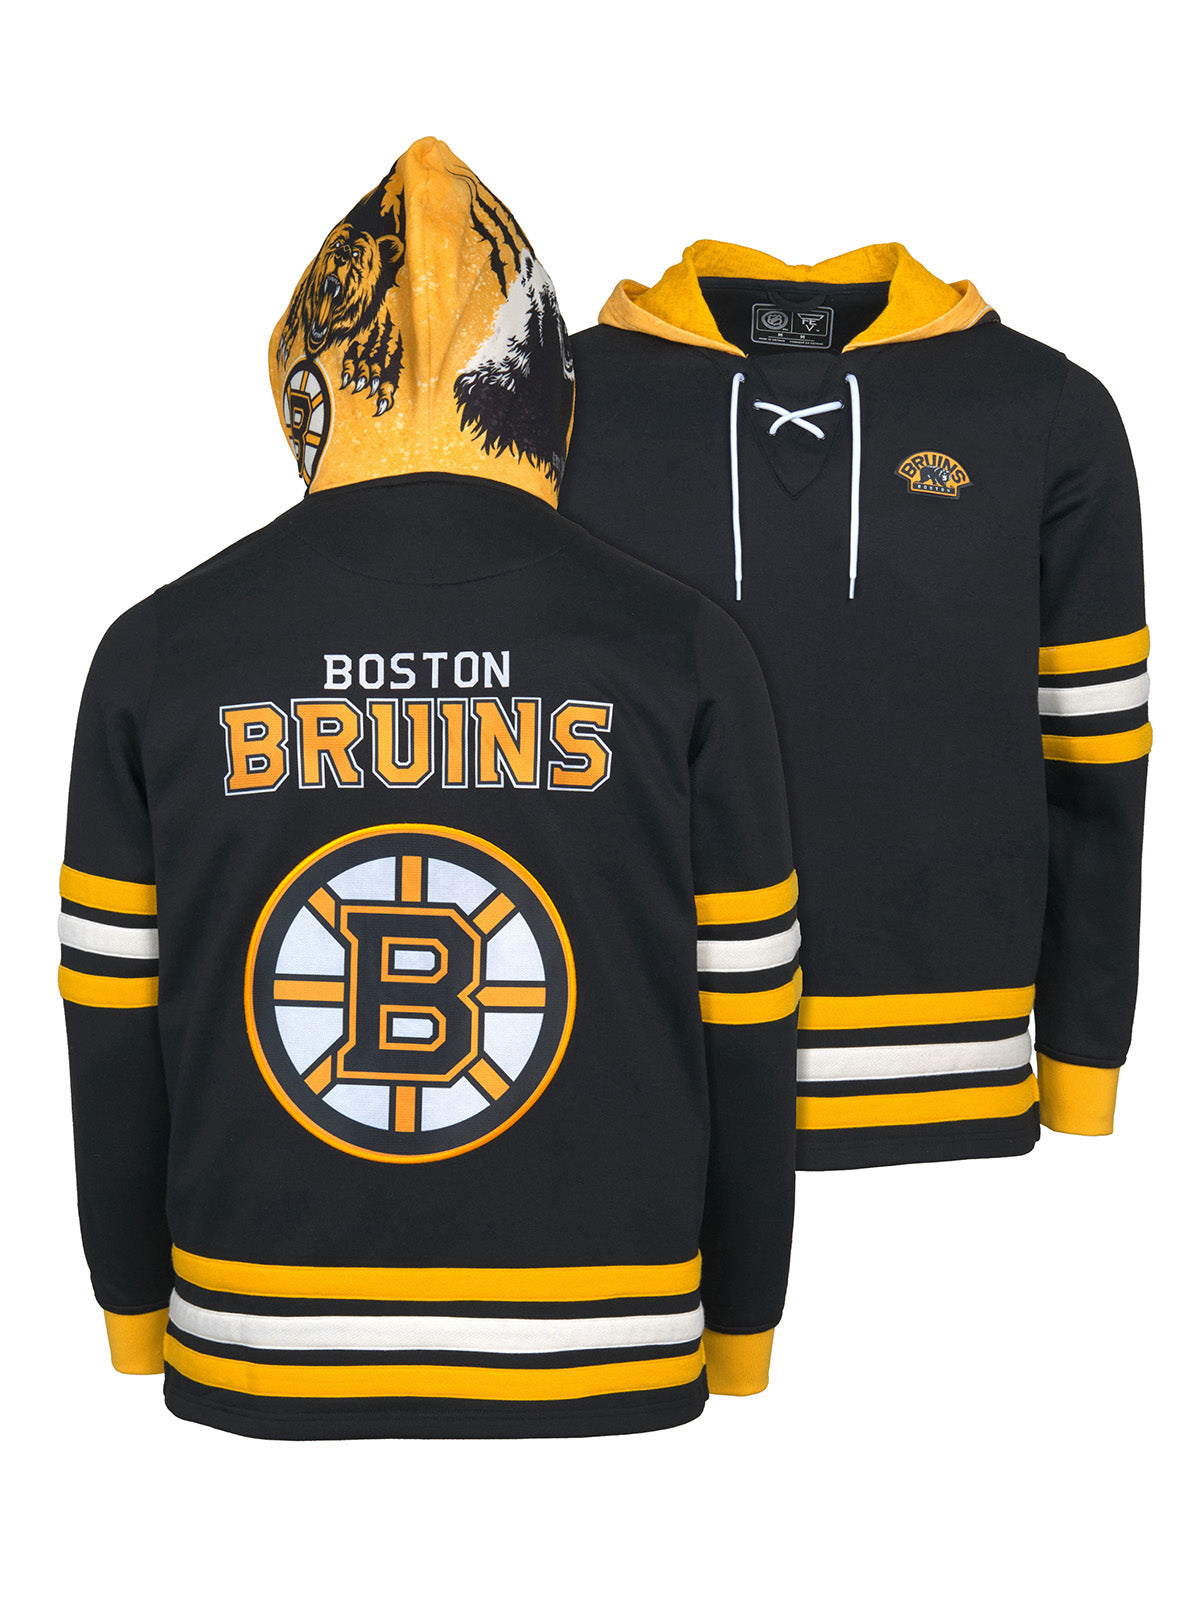 Boston Bruins Lace-Up Hoodie - Hand drawn custom hood designs with  all the team colors and craftmanship to replicate the gameday jersey of this NHL hoodie